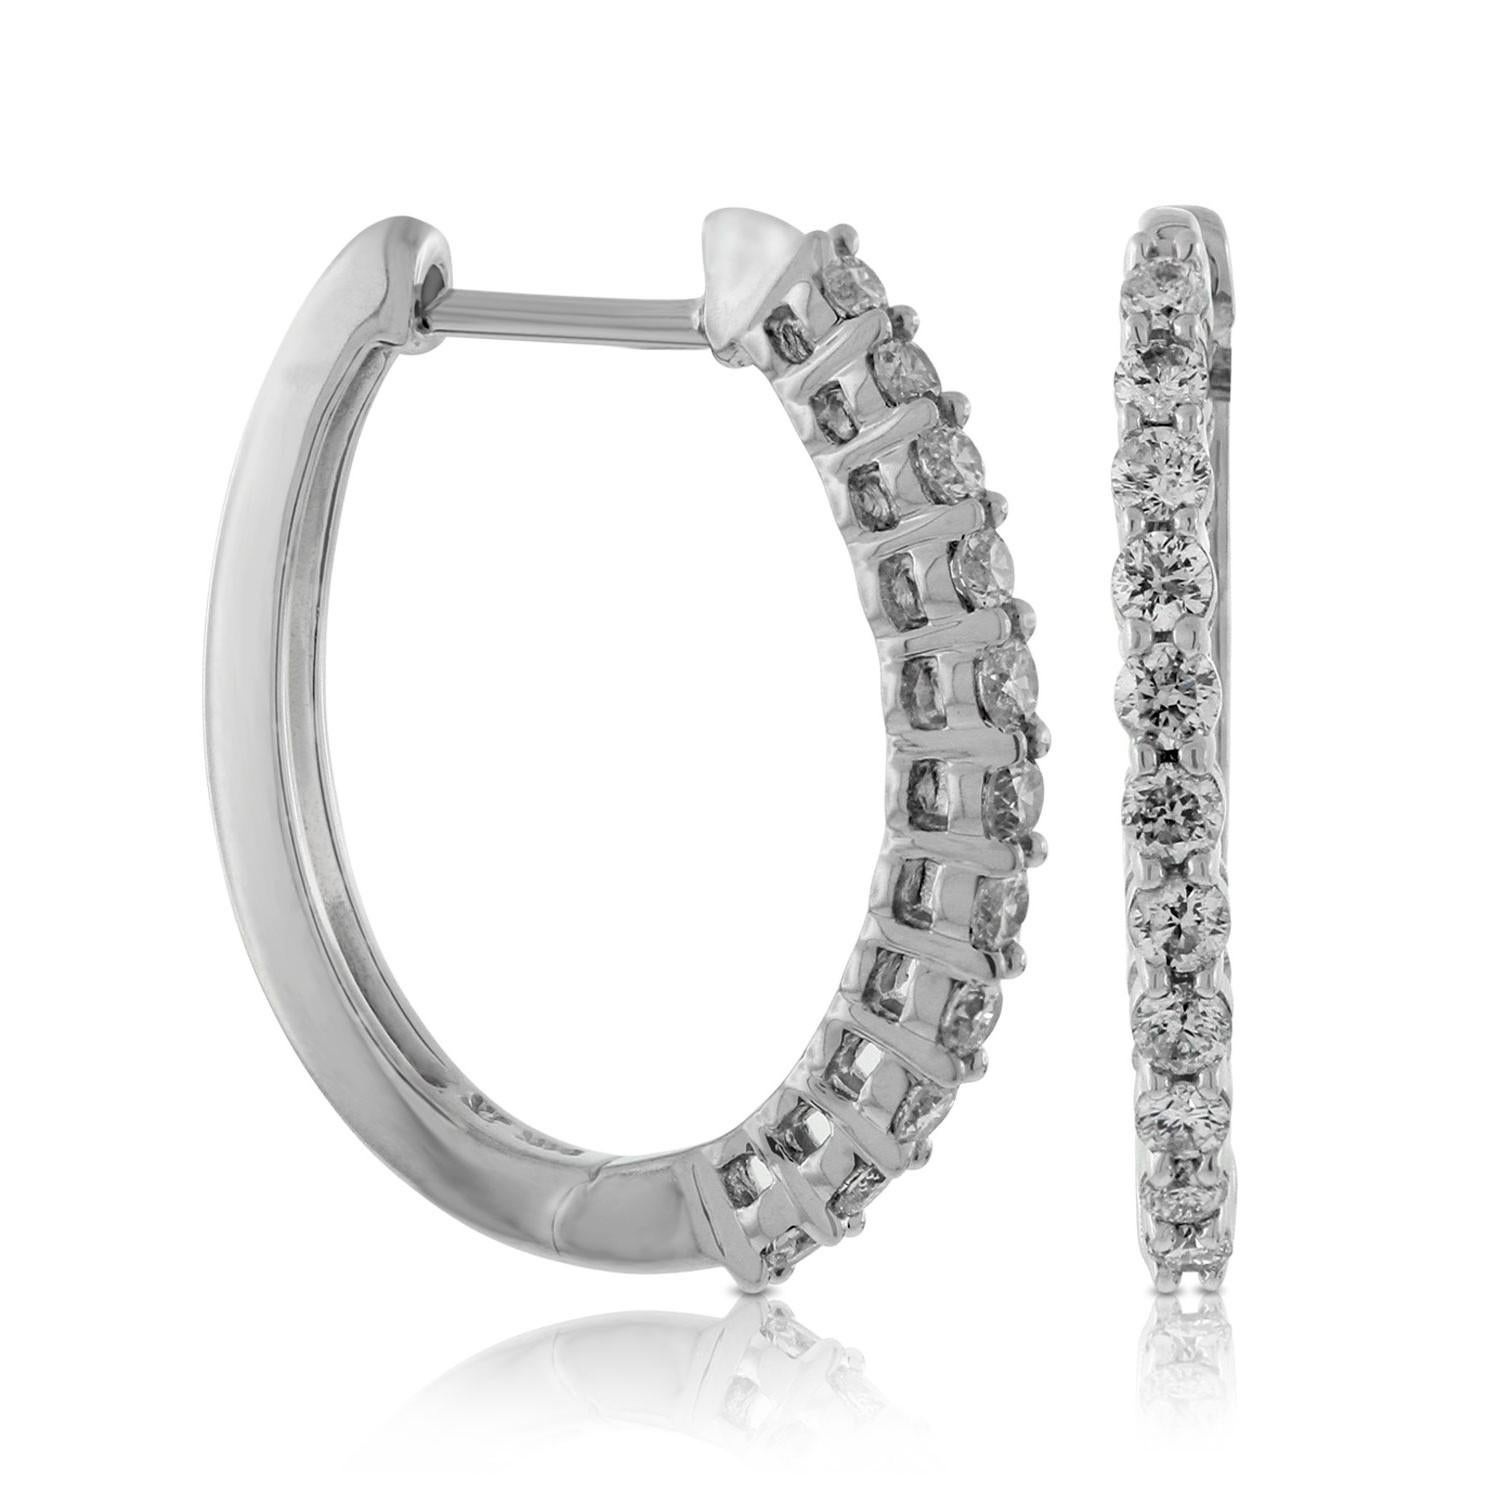 Nothing says luxury like an incredible pair of diamond round hoop earrings. These stunning brightly polished 14 karat white gold round-shaped hoop earrings feature a total of 24 round brilliant cut diamonds totaling .50 carats are prong set on the